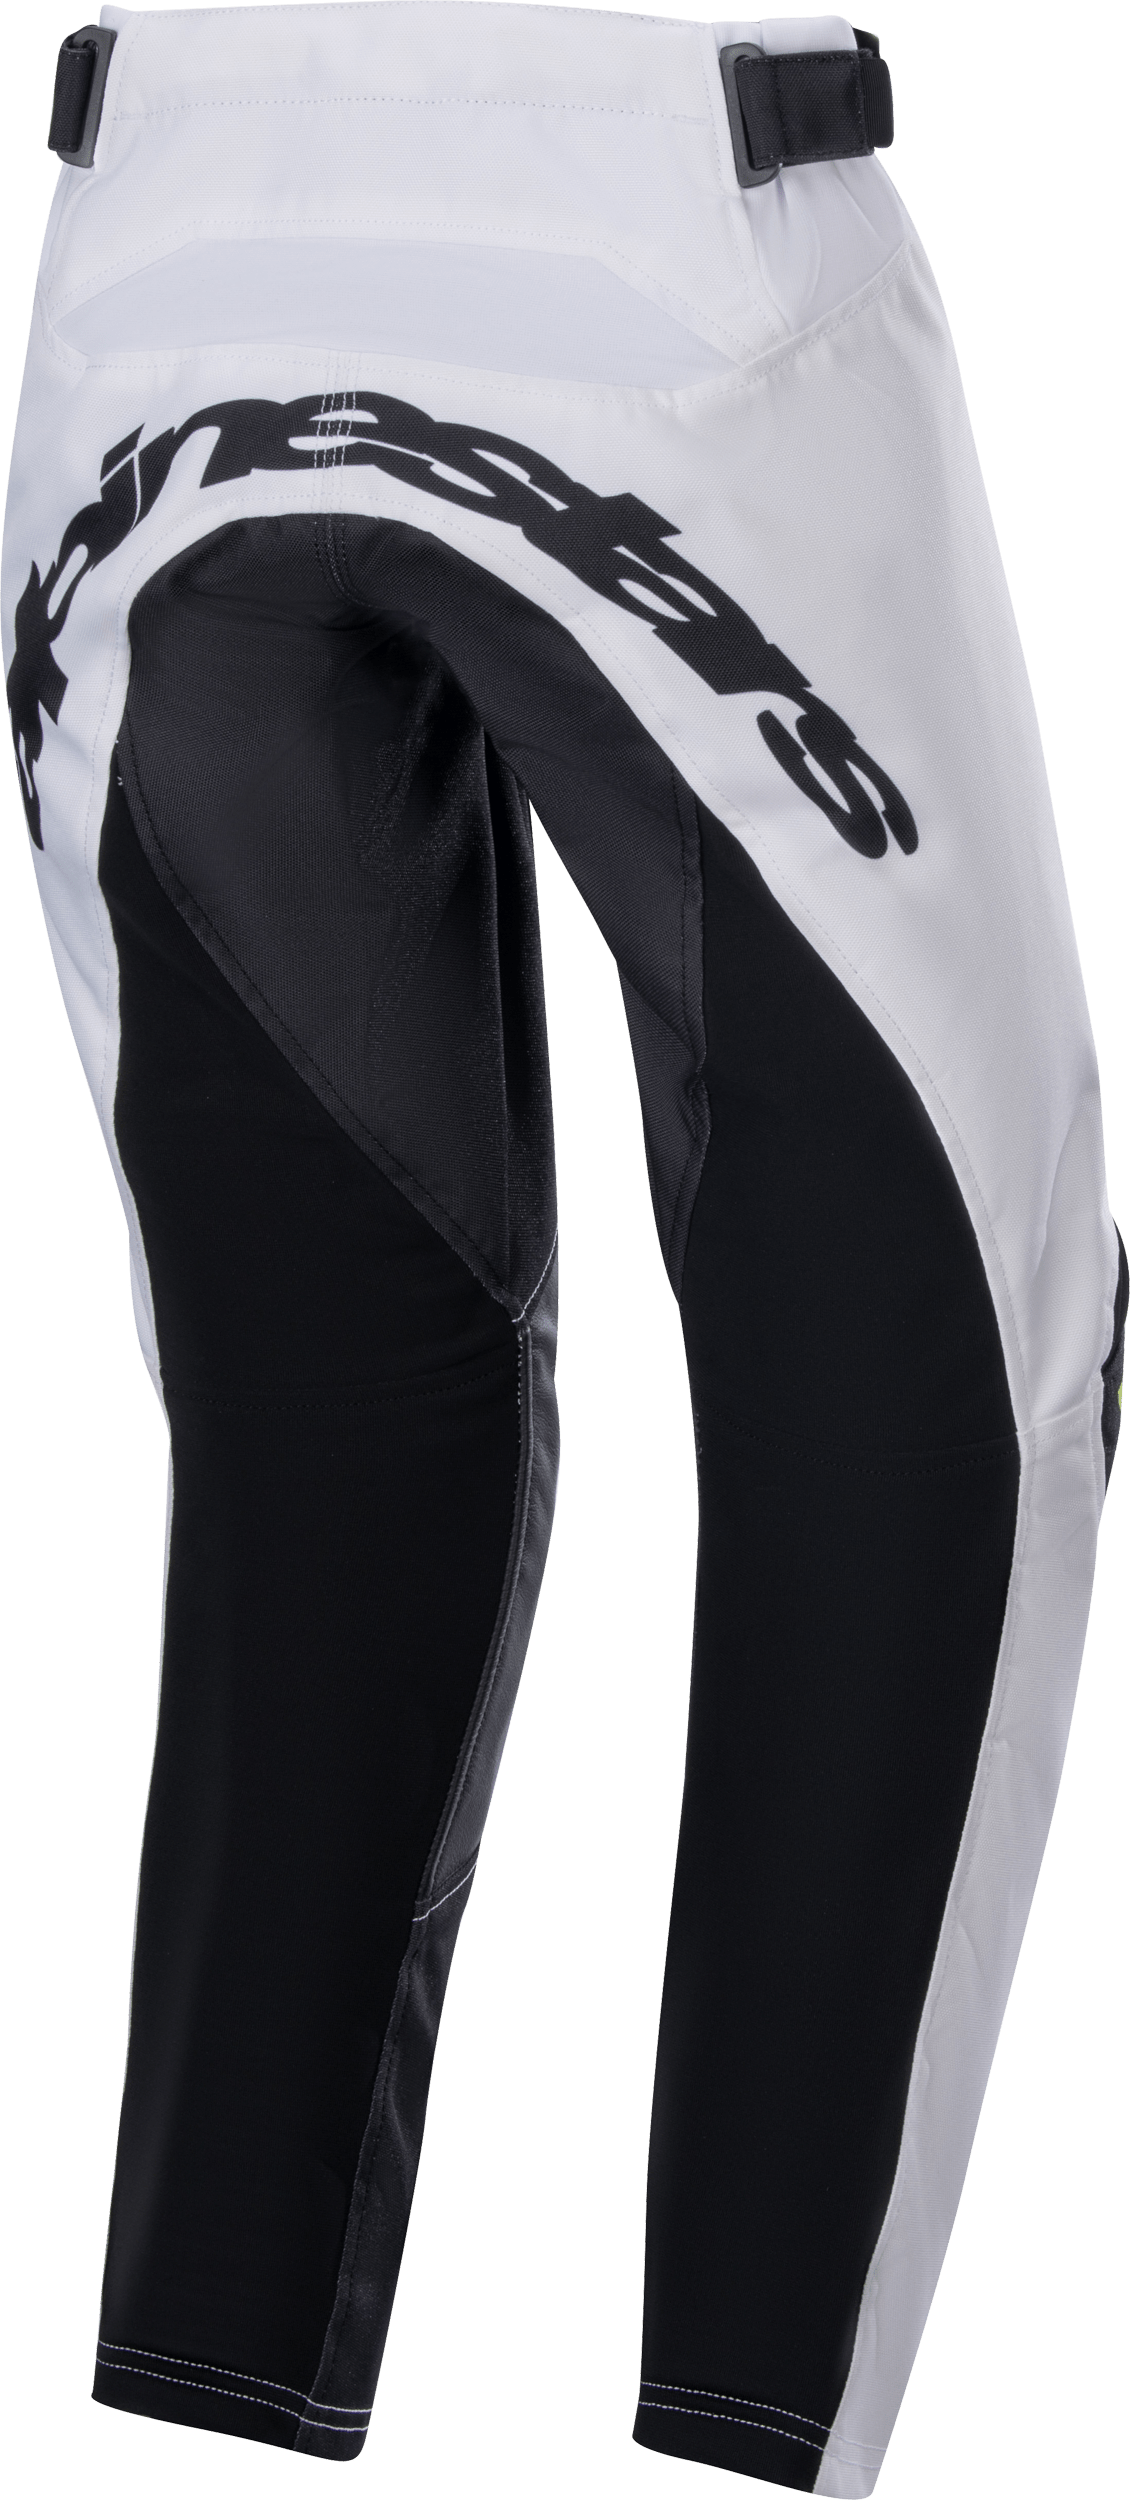 Western Powersports Pants Youth Racer Lucent Pants By Alpinestars